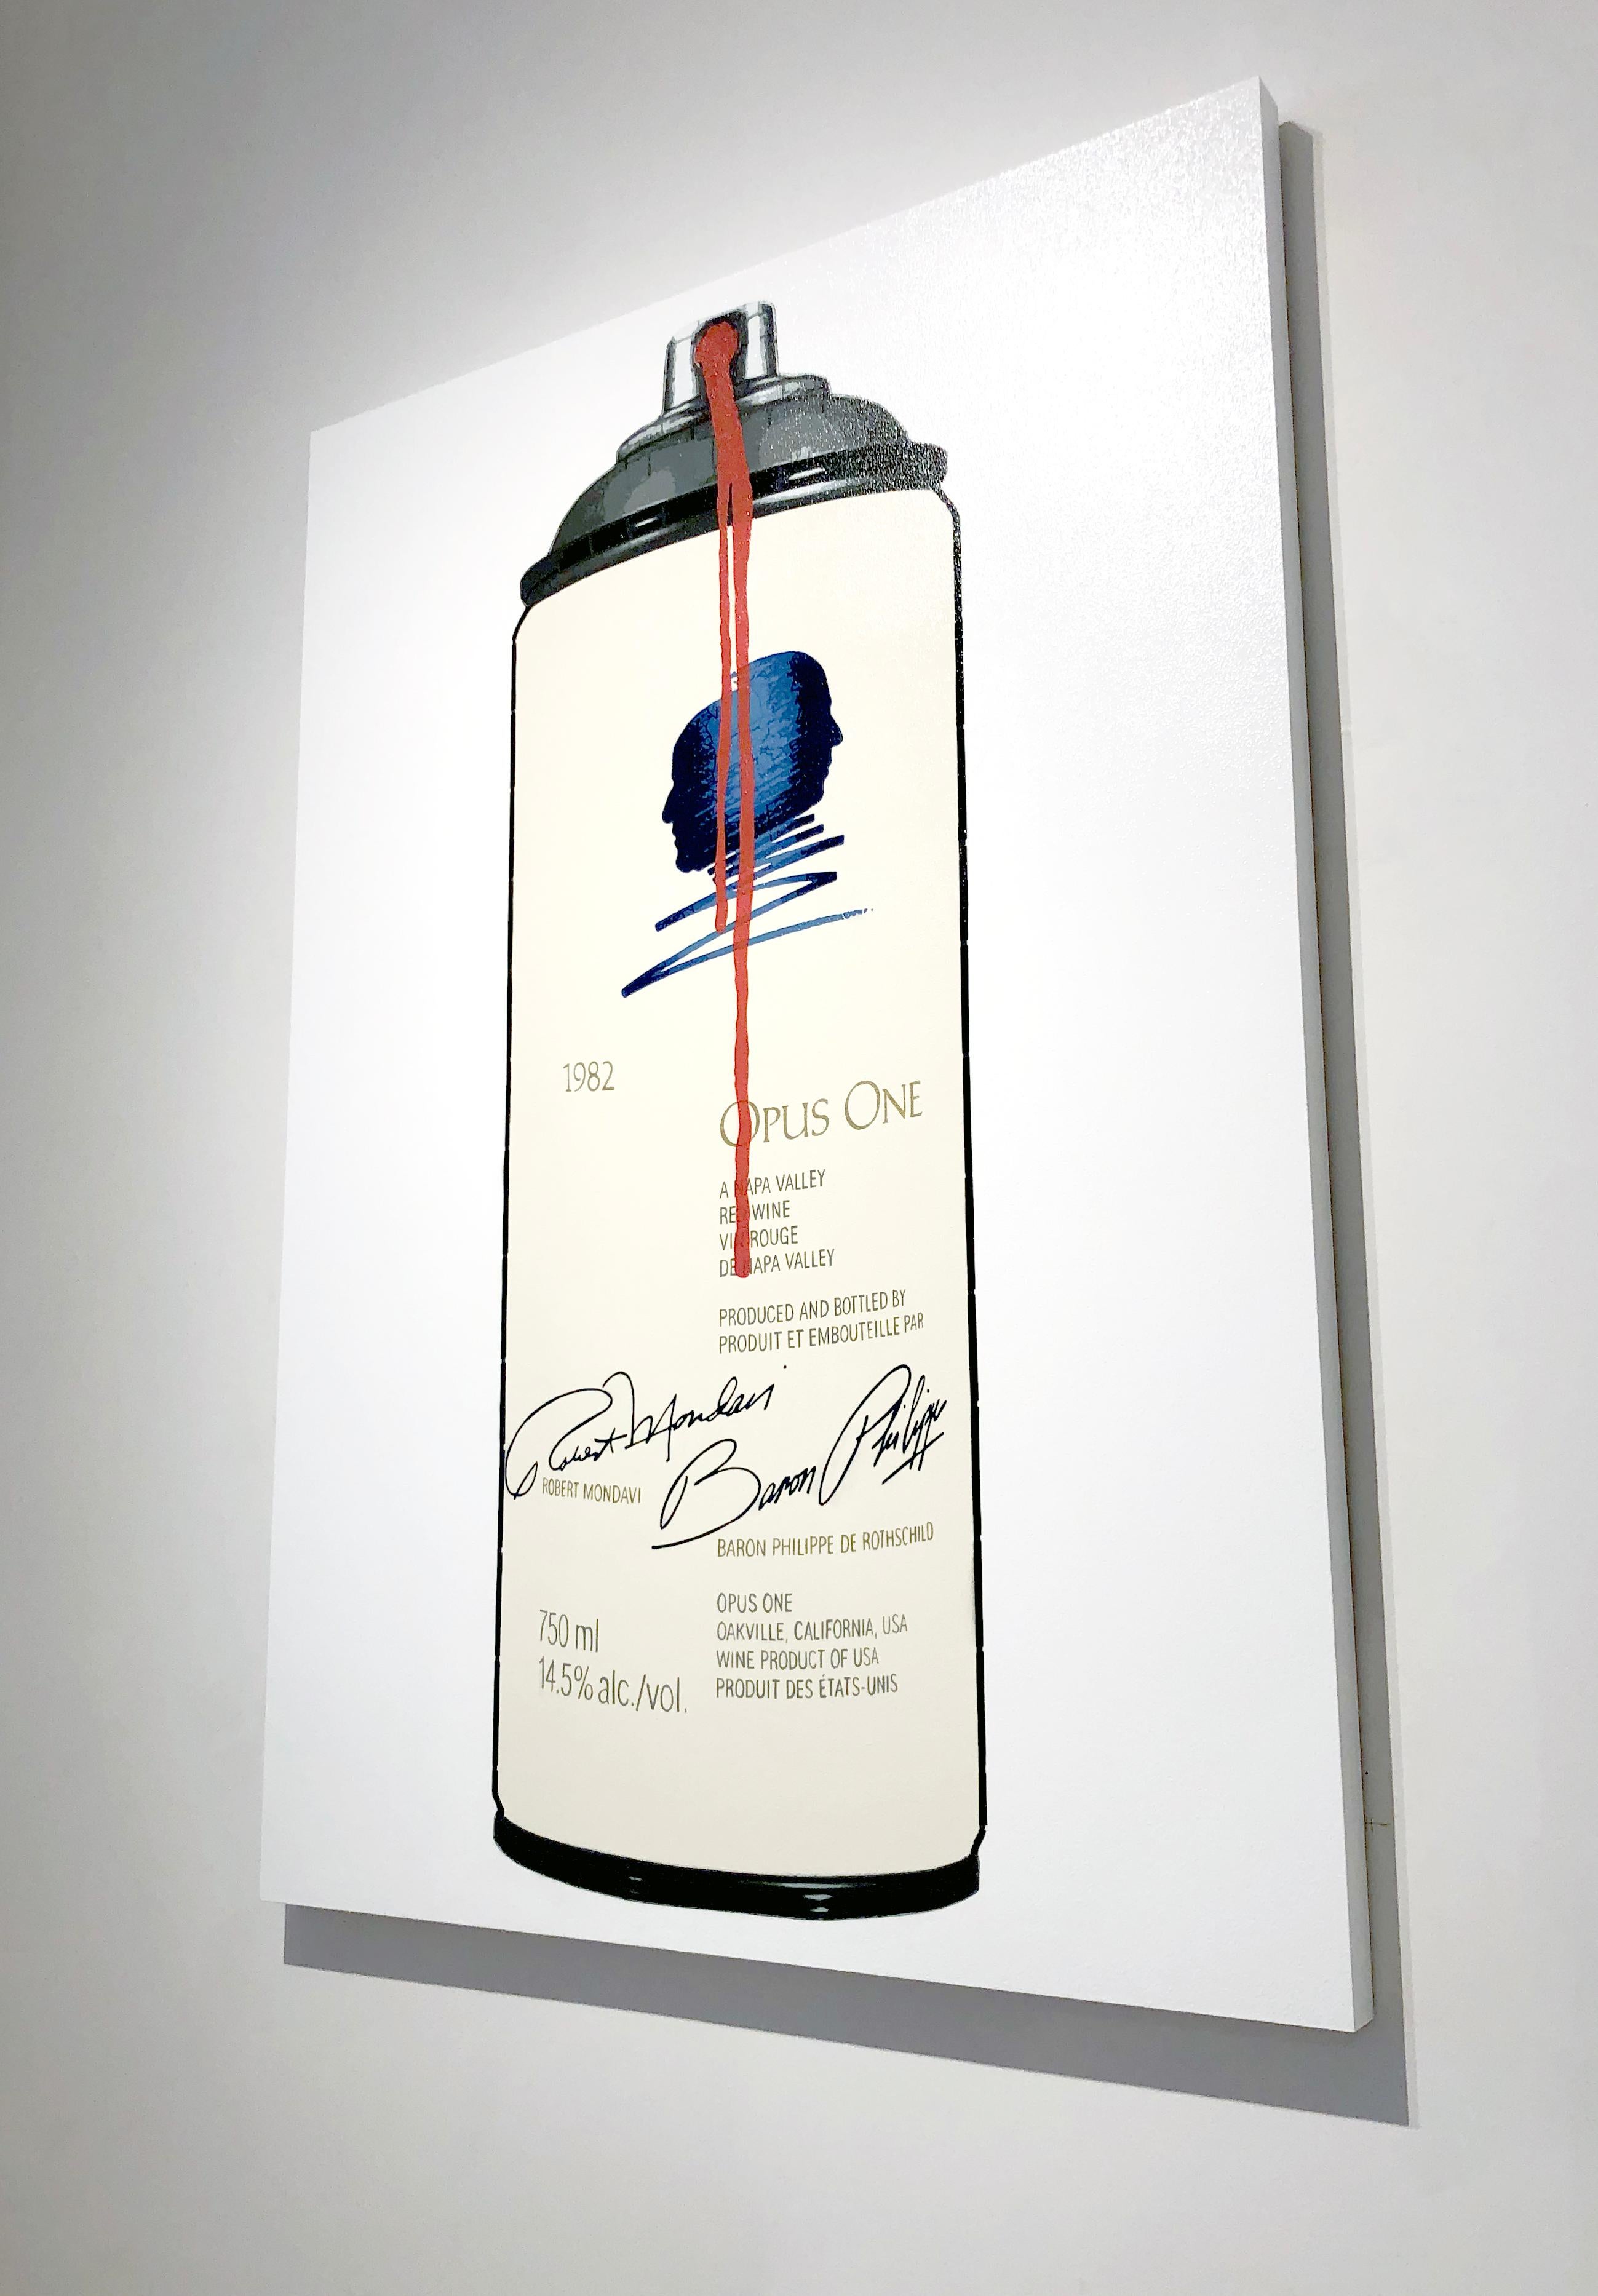 Artist:  La Pun, Campbell
Title:  Opus One
Date:  2019
Medium:  Aerosol on Panel
Unframed Dimensions:  40.5 x 28.6 inches
Signature:  Signed
Edition:  Unique